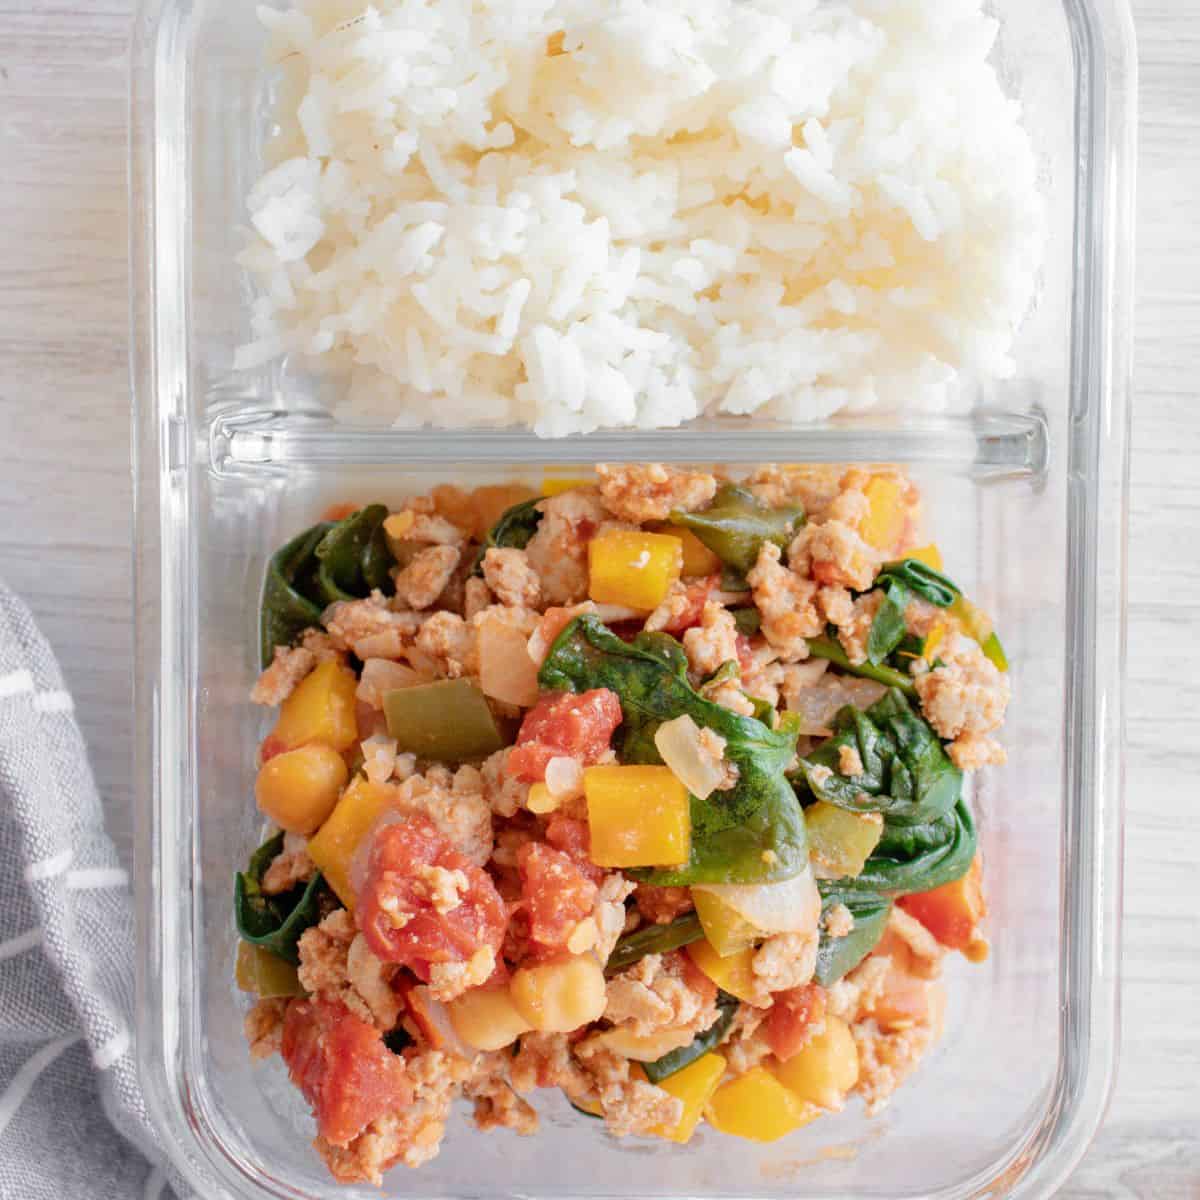 Meal Prepping With Ground Turkey (Meal Prep Bowls)